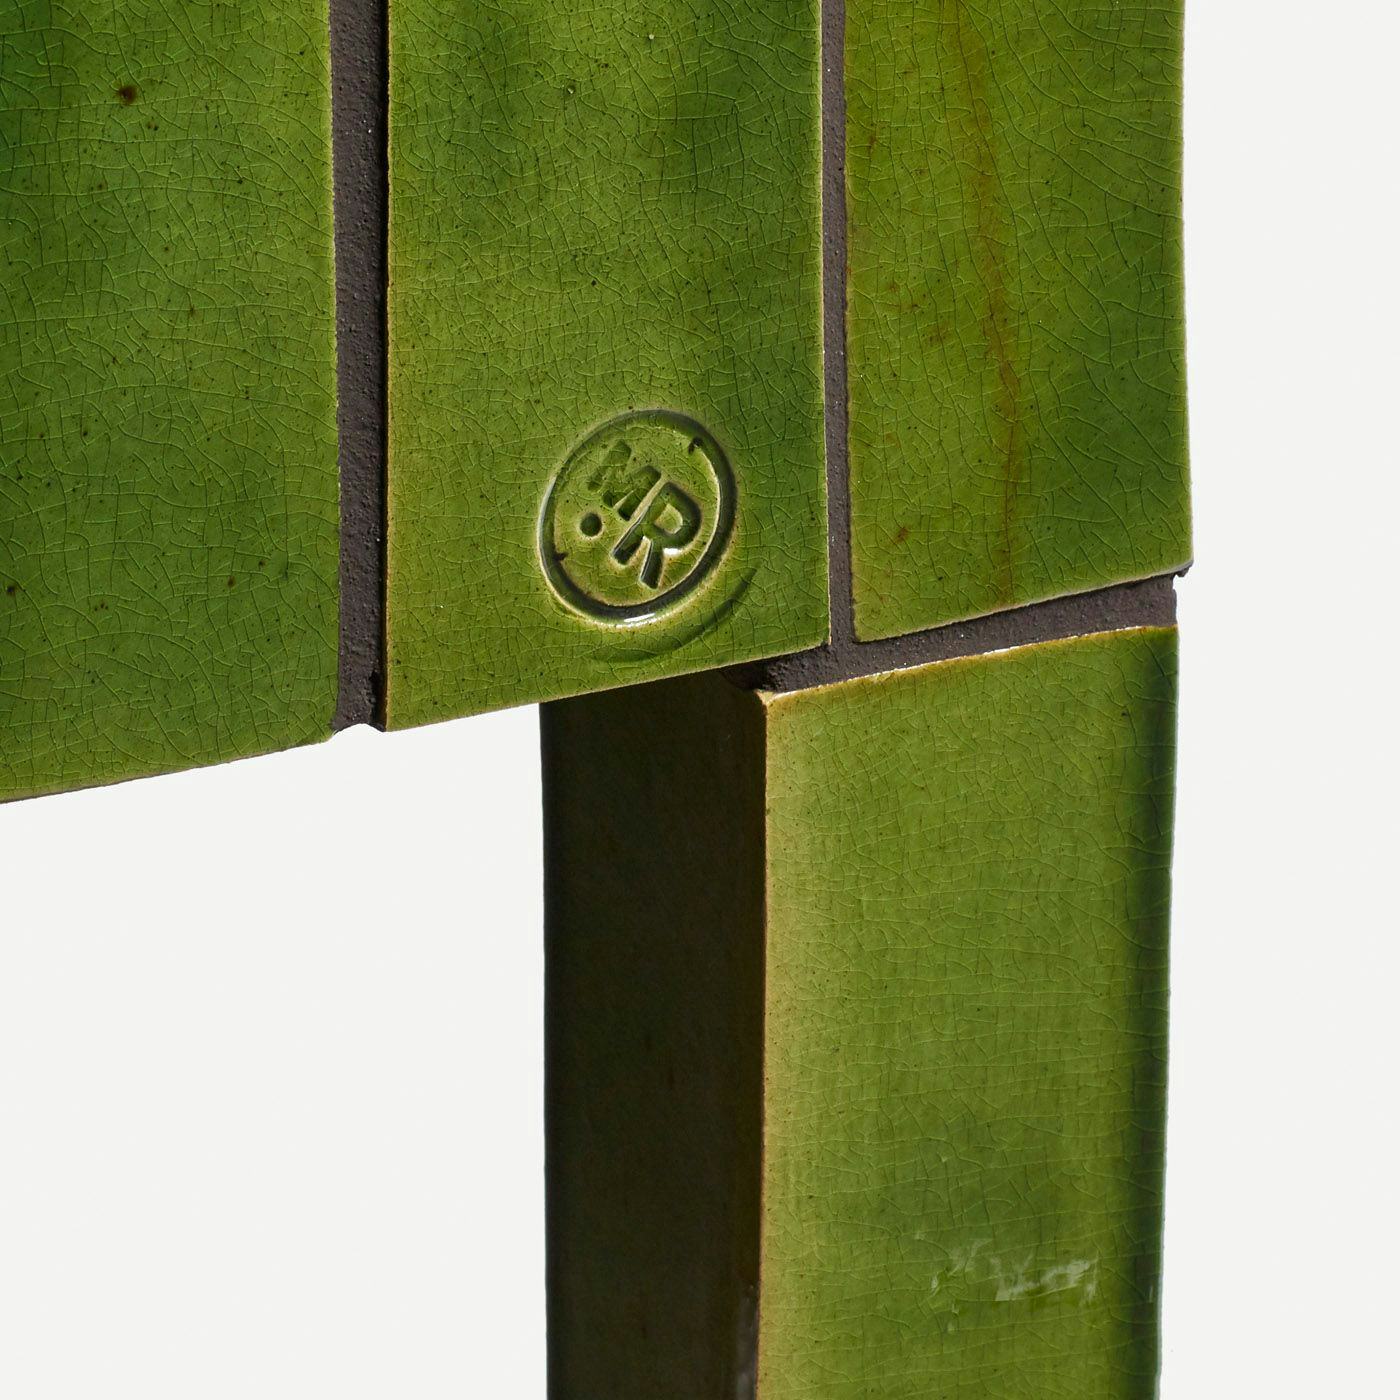 A detail of a green tiled cupboard showing the makers mark: a circle with the initials M R